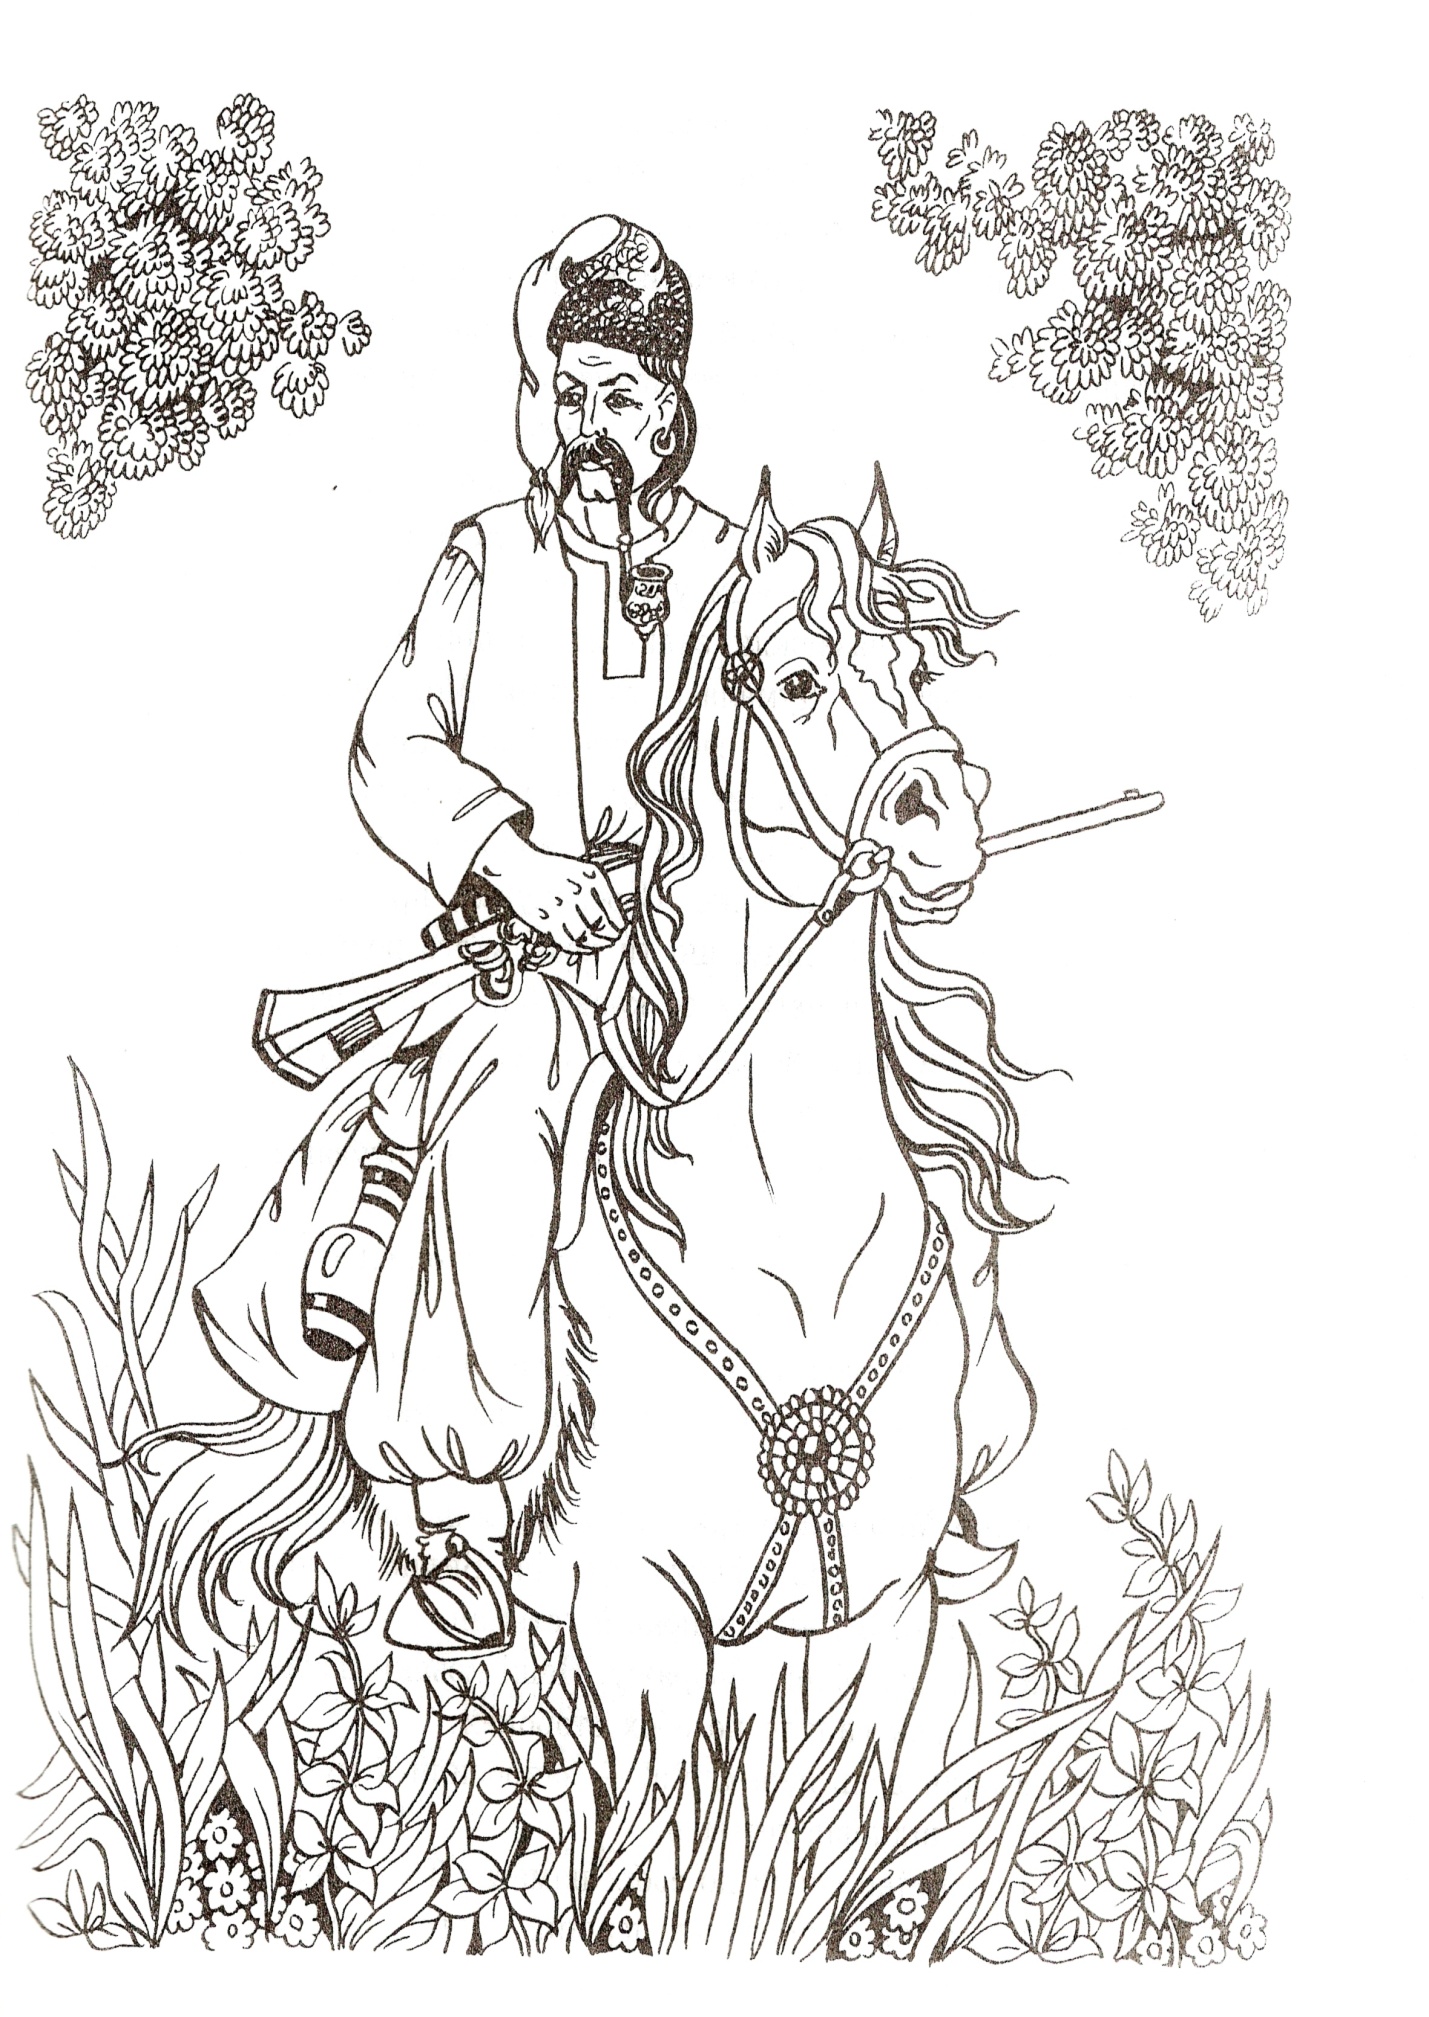 Cossack drawing